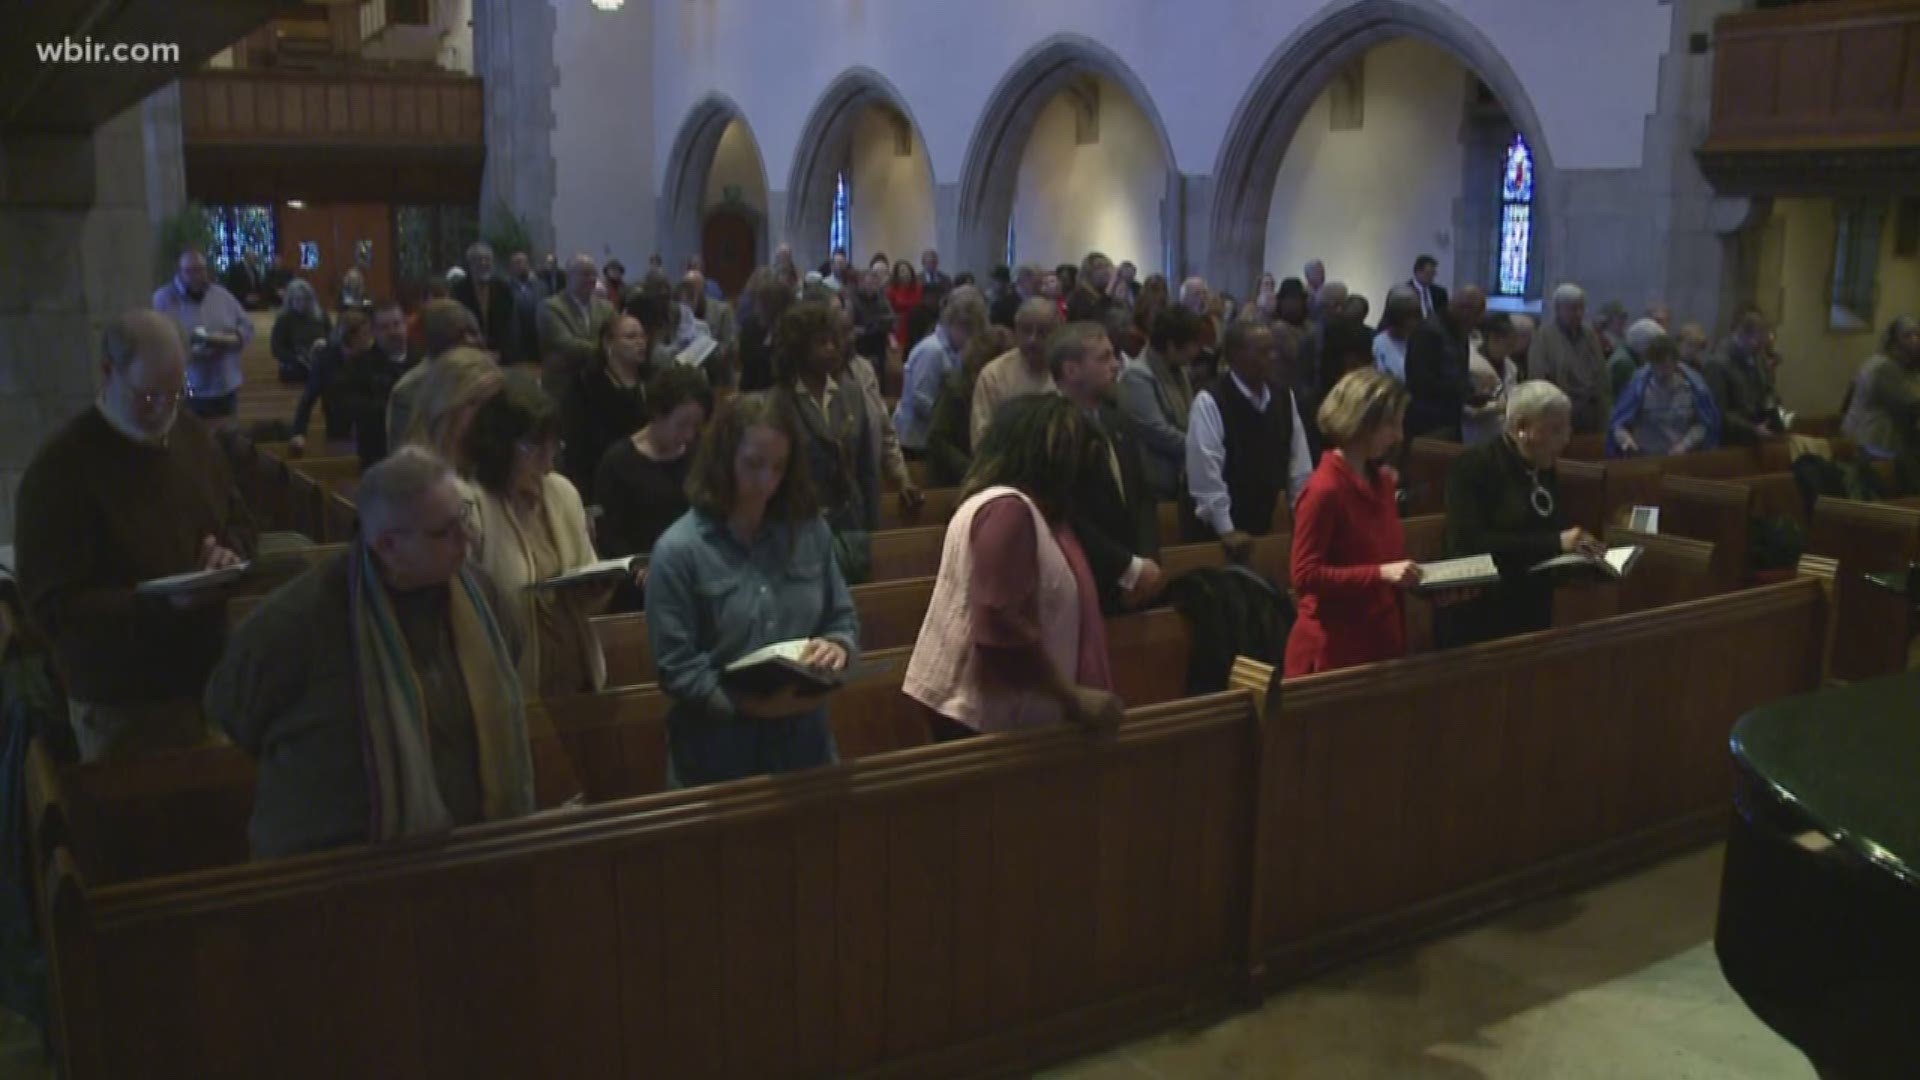 Members of the Knoxville community gathered Wednesday to celebrate the legacy of Martin Luther King Jr.